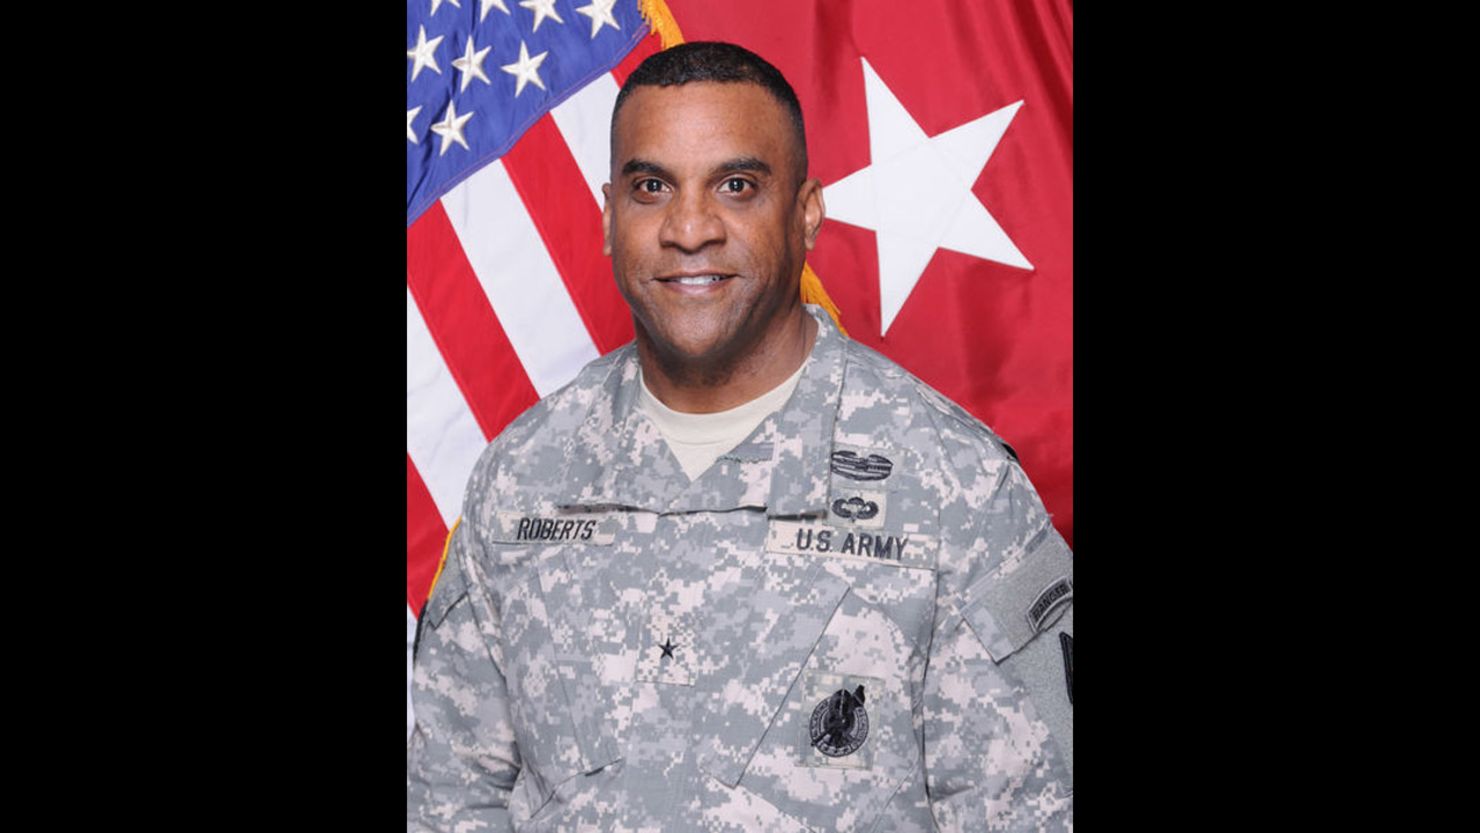 Brig. Gen. Bryan Roberts was relieved of his duties as commanding general of the U.S. Army training center and Fort Jackson.